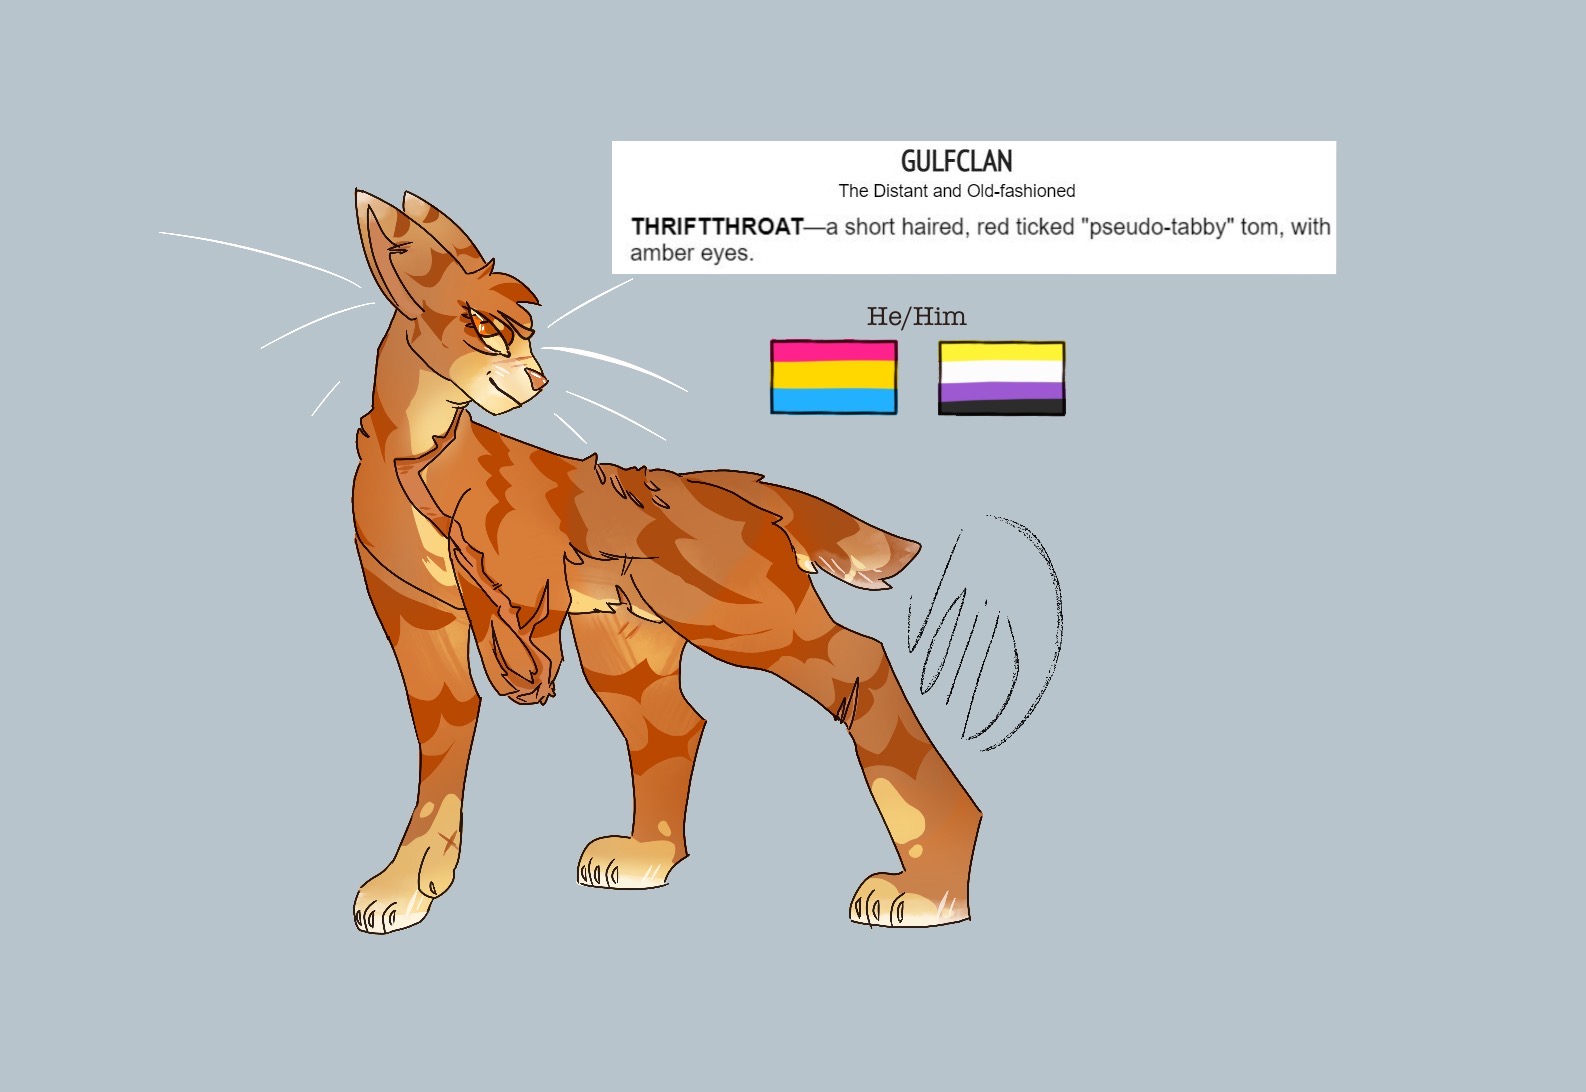 Warrior Cats Name Generator by Aliona-LoveArt14 on DeviantArt